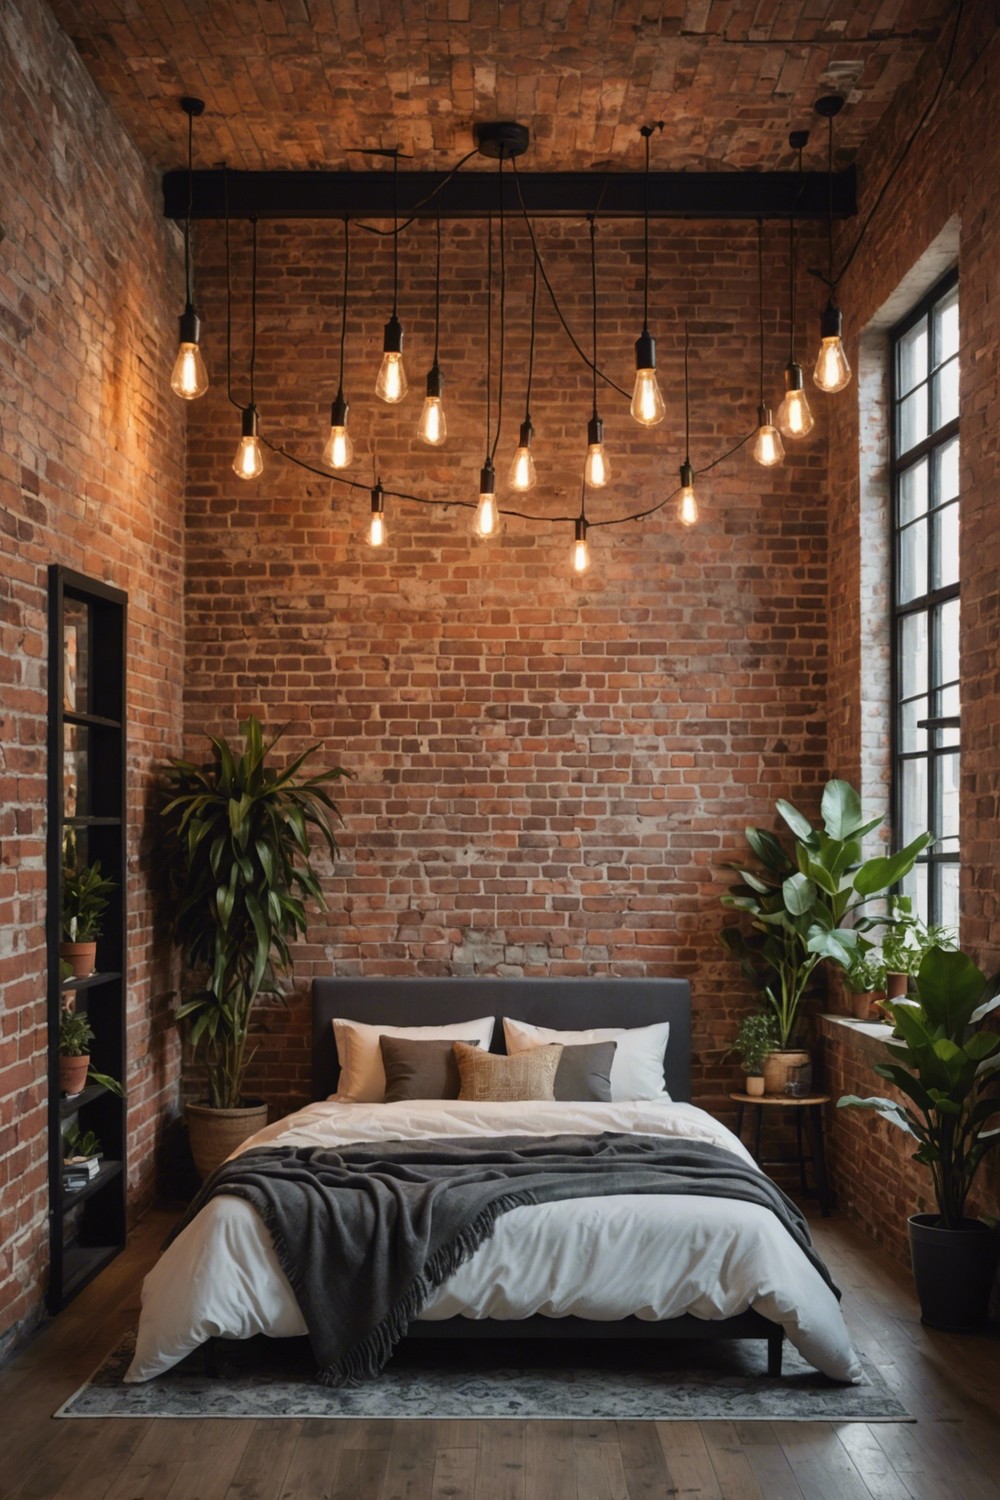 Urban Oasis: Hanging Industrial Lights above a Minimalist Bed